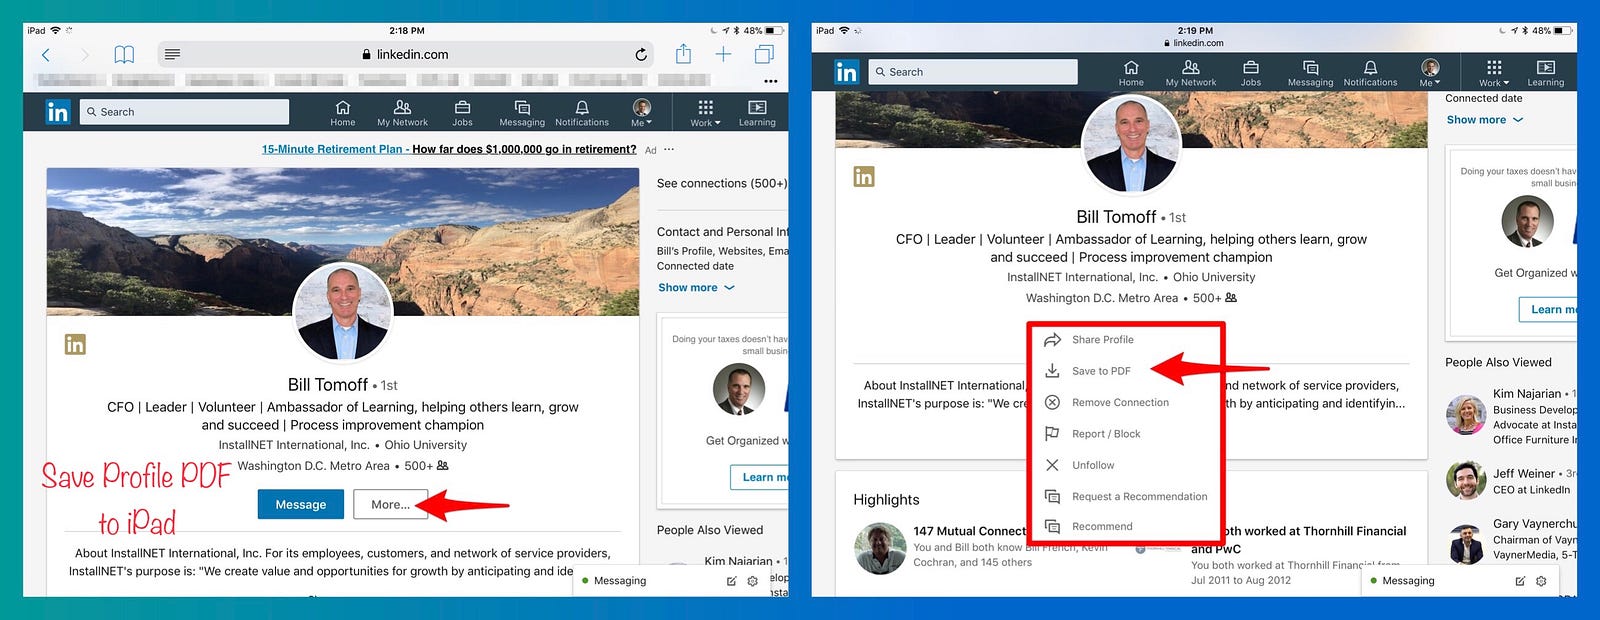 how to download video from linkedin on iphone